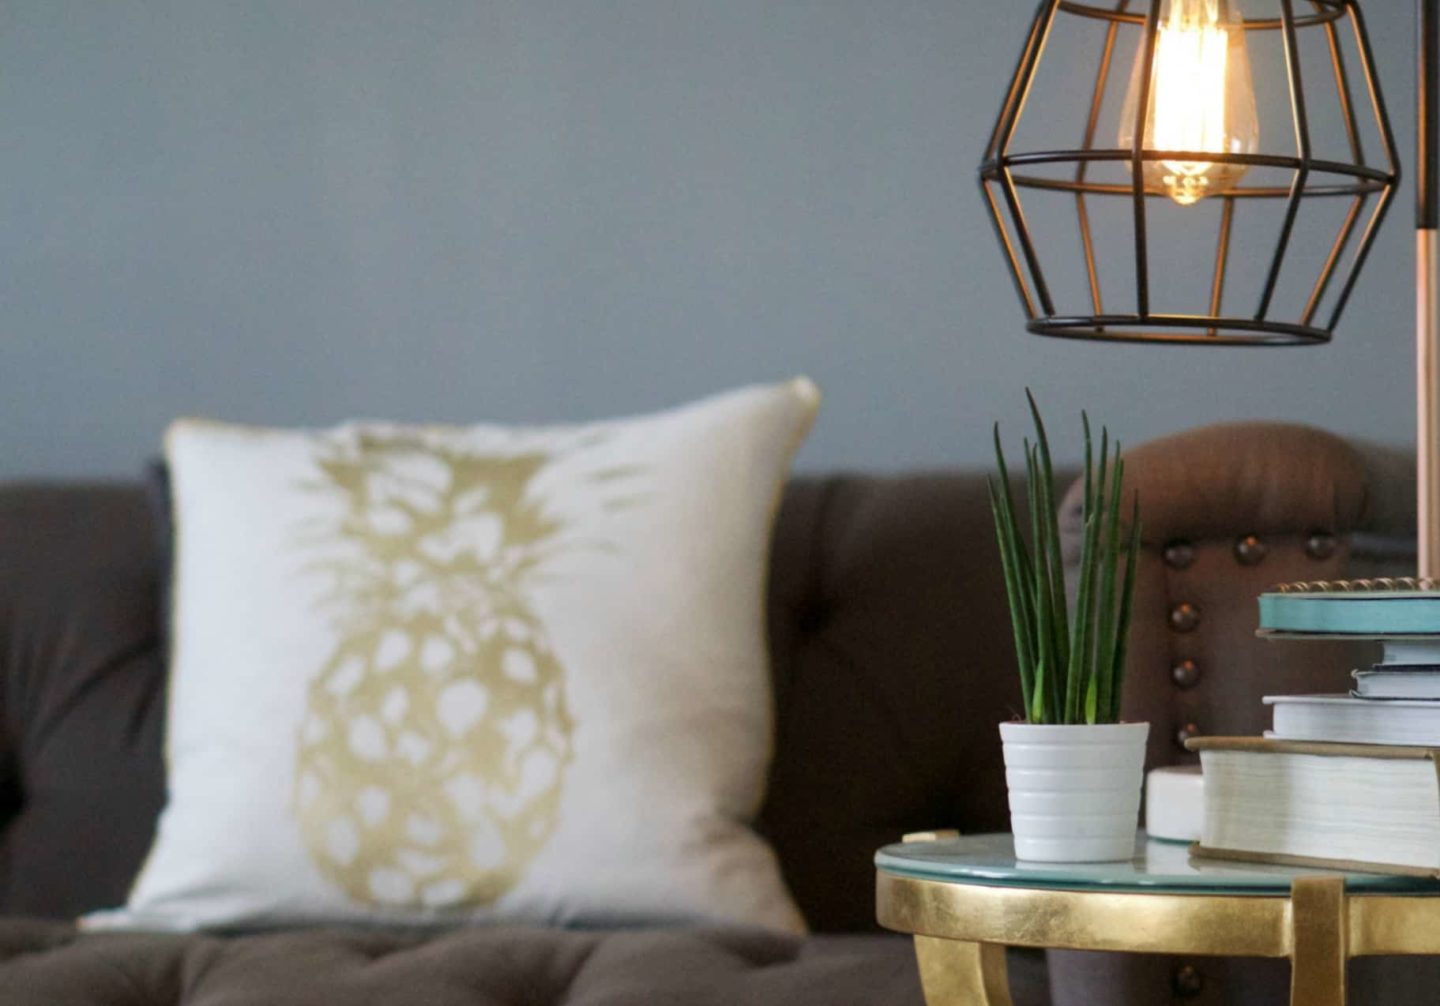 Home Style Trends, Gold is the new Black